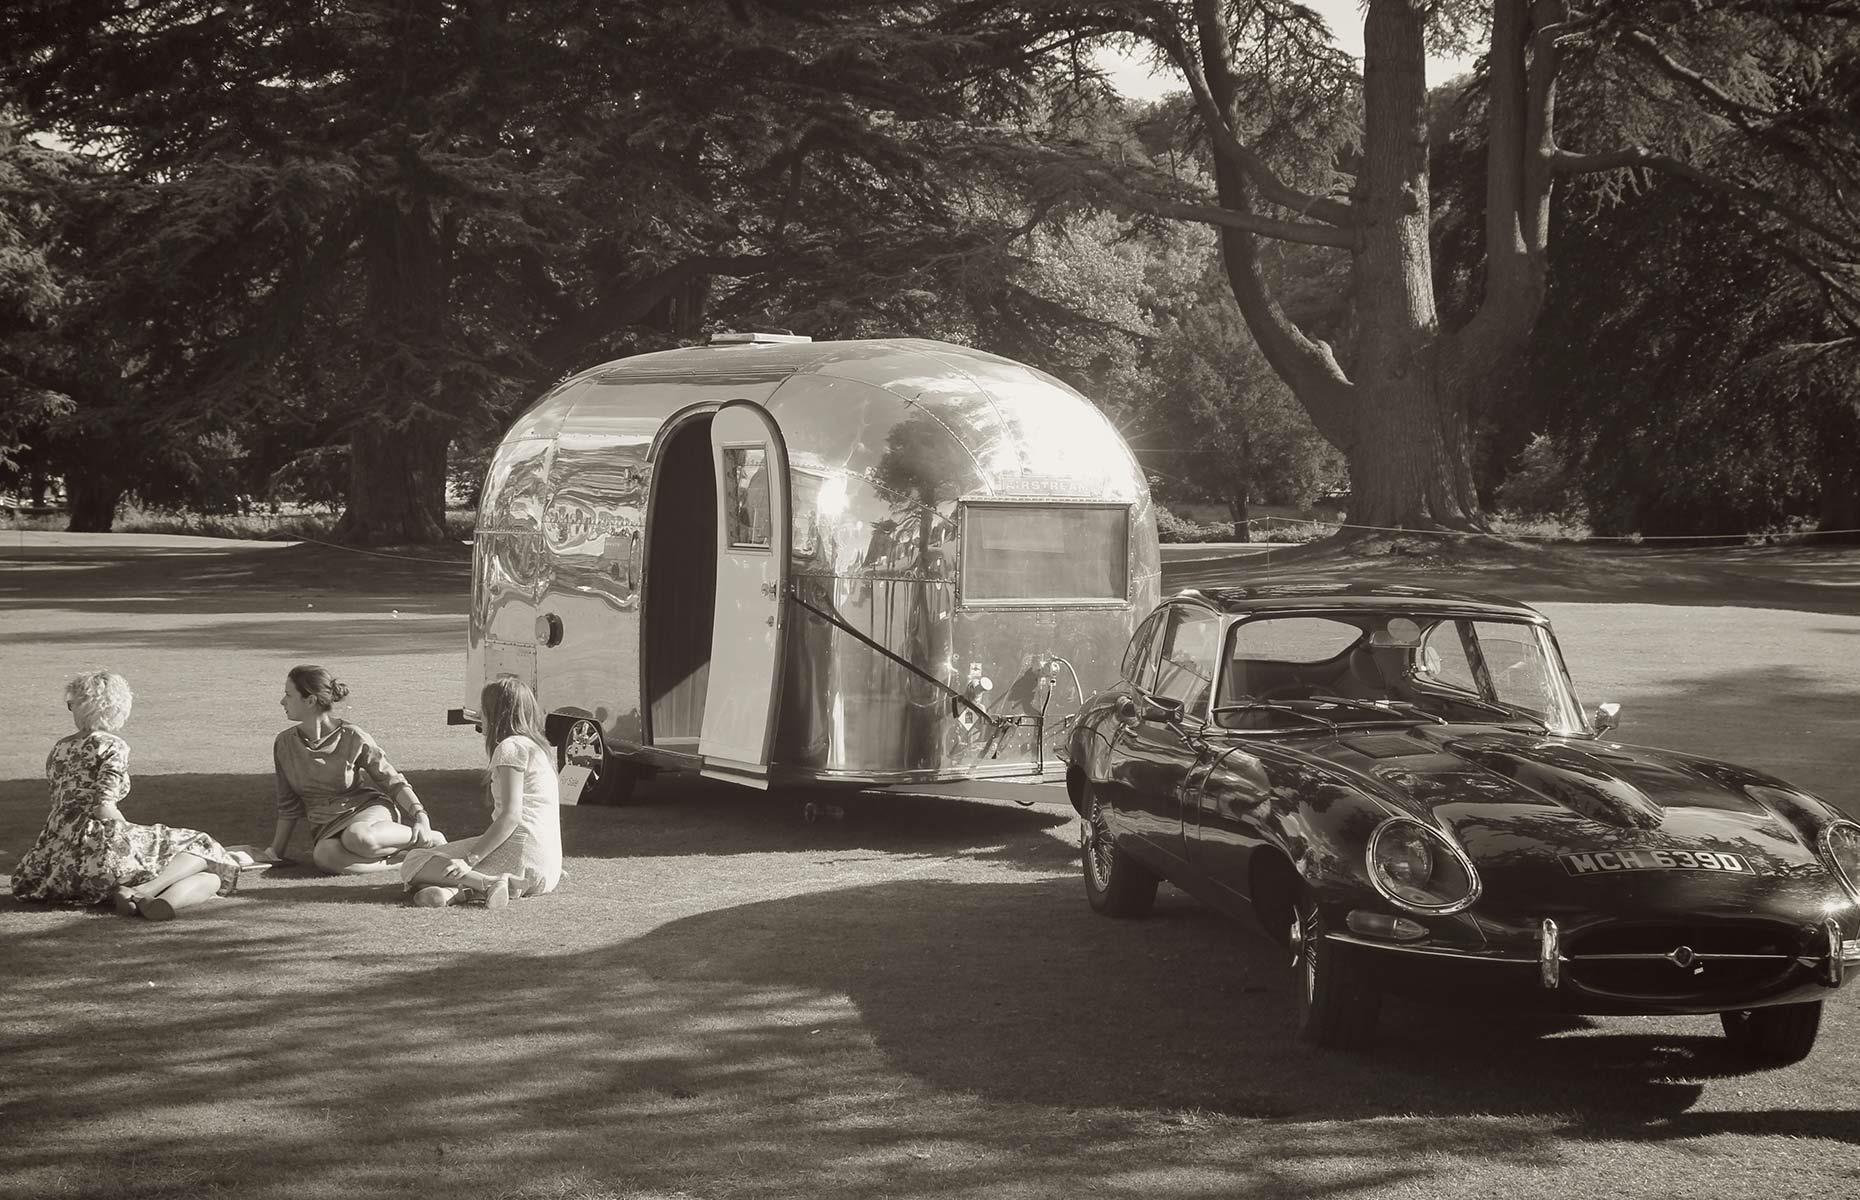 <p>Production ceased during the Second World War, so Byam closed his business and focused on making aeroplanes instead of trailers, teaming up with aeronautical firms Lockhead and Curtis Wright.</p>  <p>Once the war had ended, Byam re-established Airstream. Applying the aeroplane design skills he learned during wartime, Byam created the Curtis Wright Clipper in 1948. The upgraded Clipper was an overnight success, selling in the thousands. In 1950, Byam created the Flying Cloud, which is still produced today.</p>